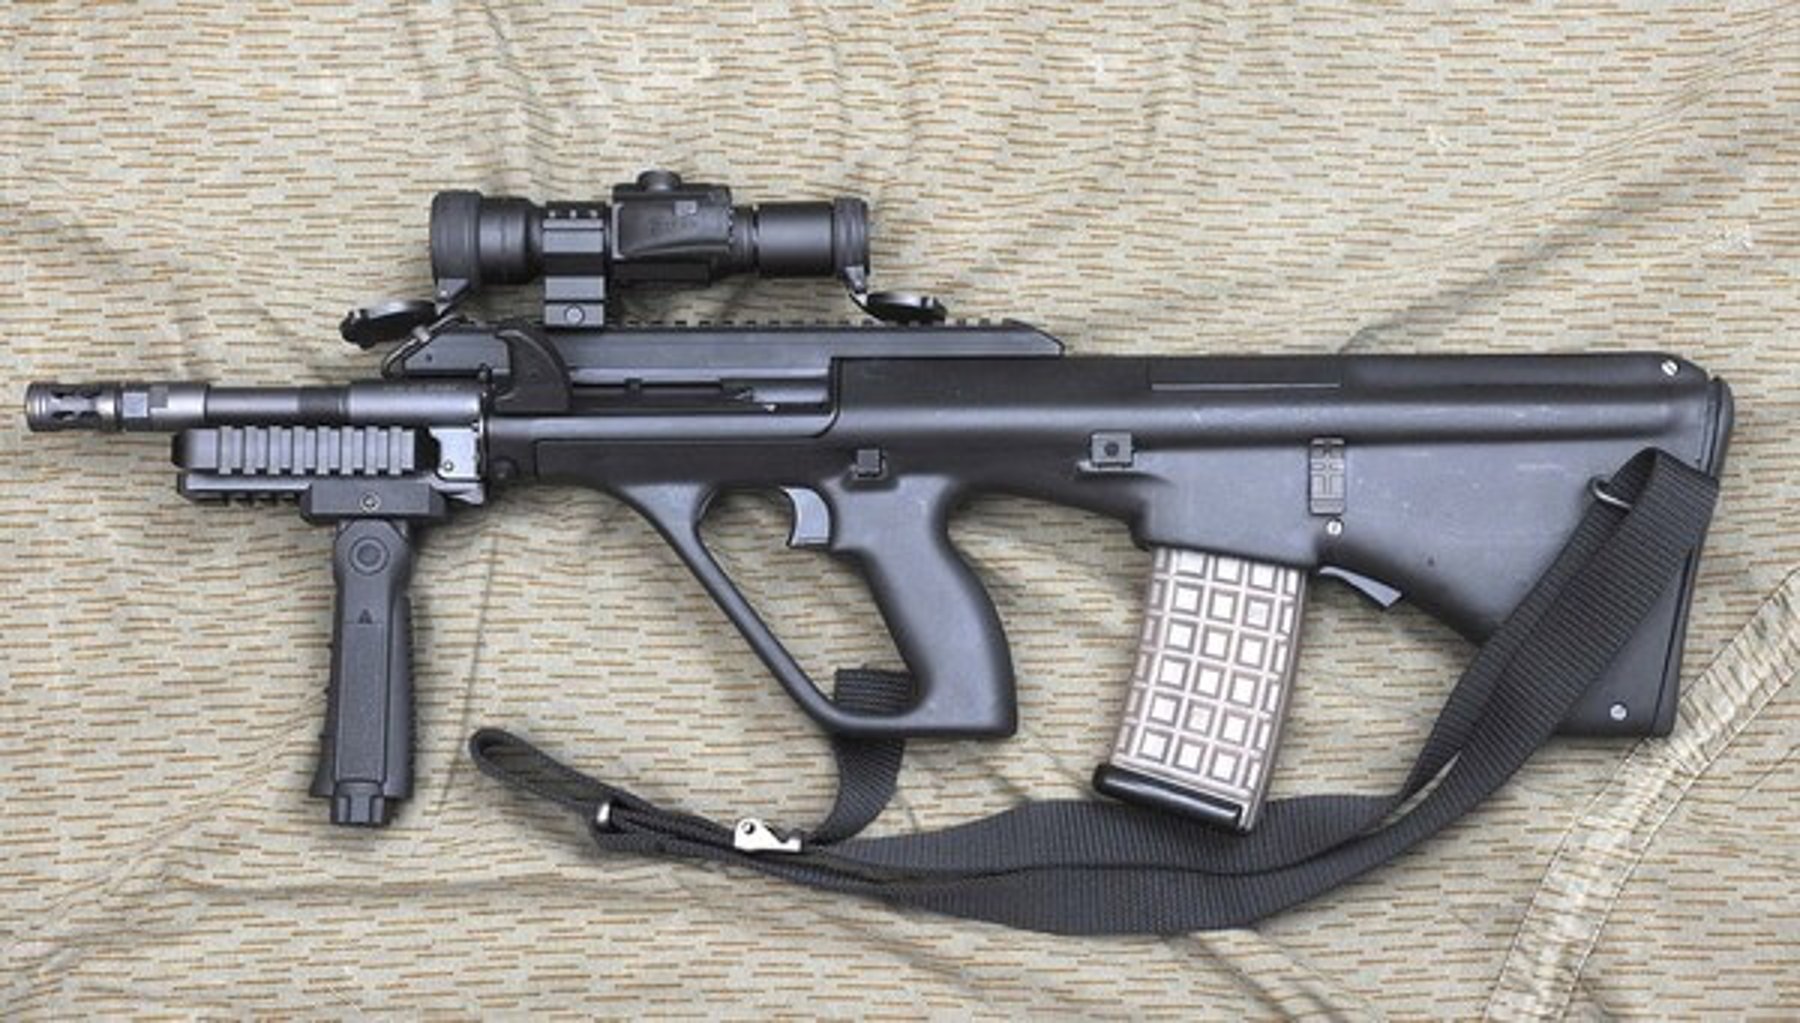 Steyr Aug A3 Sa The Future Is Here All4shooters